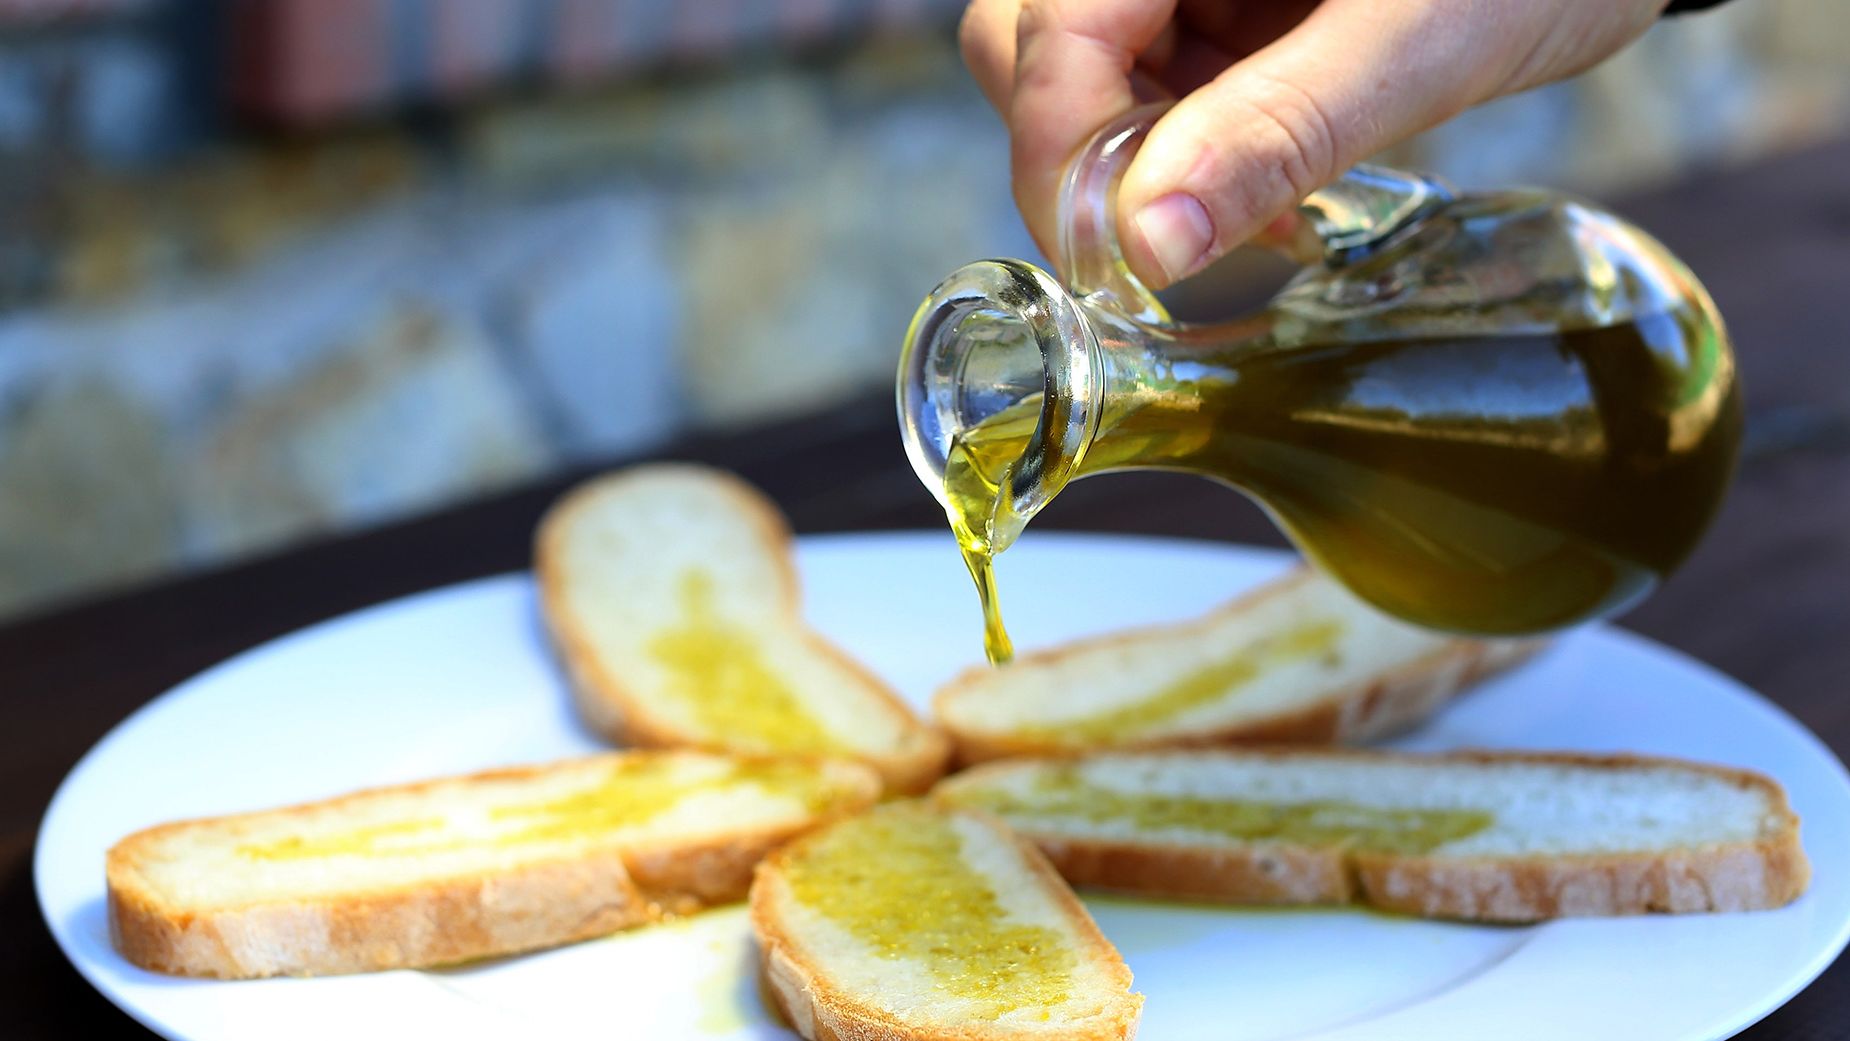 Extra virgin olive oil is getting very expensive. And it might not